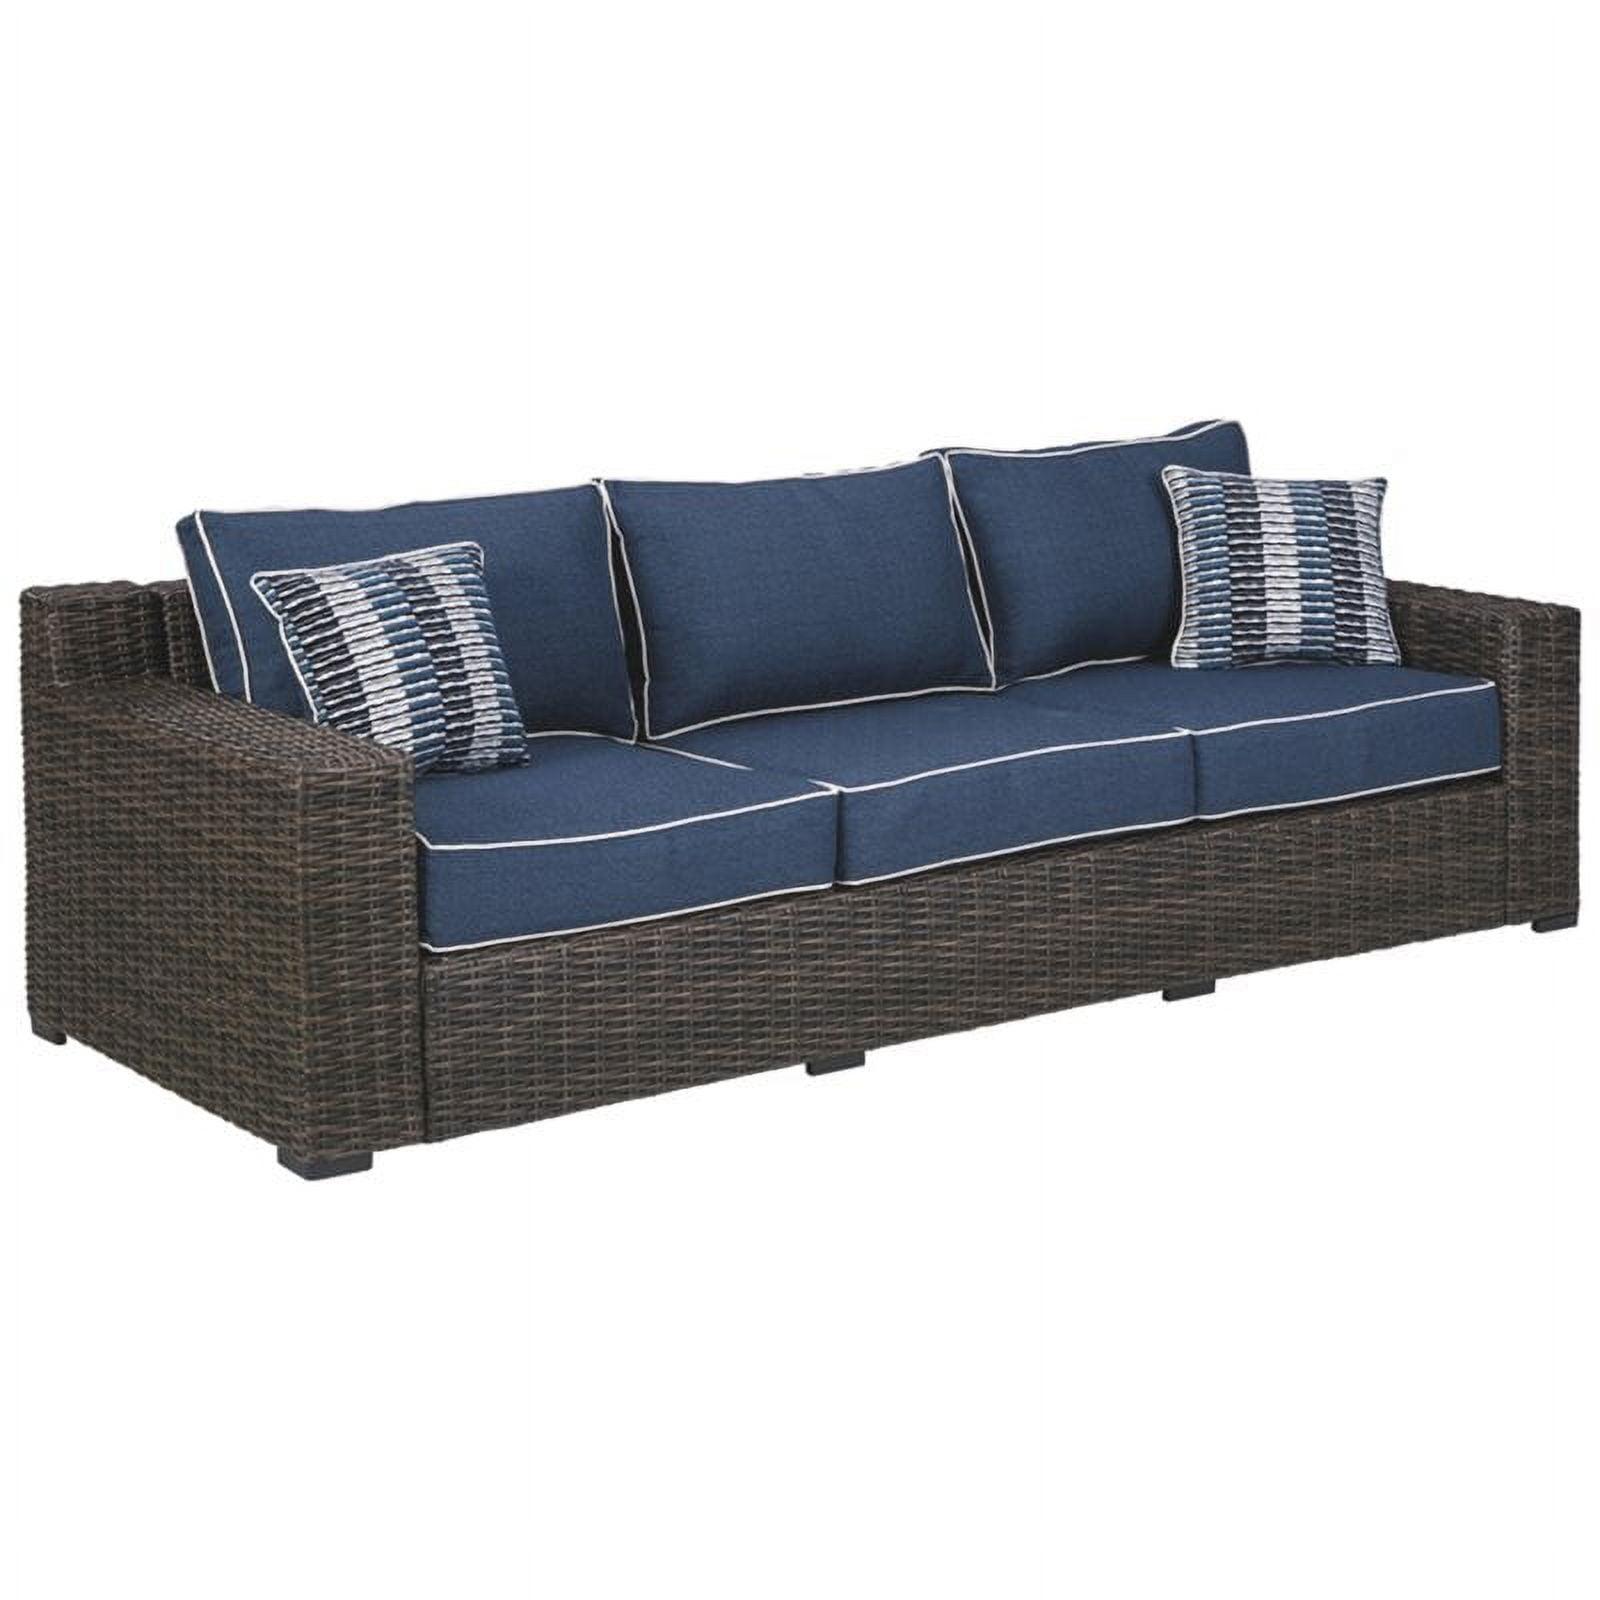 Grasson Lane 97" Transitional Blue and Brown Wicker Outdoor Sofa